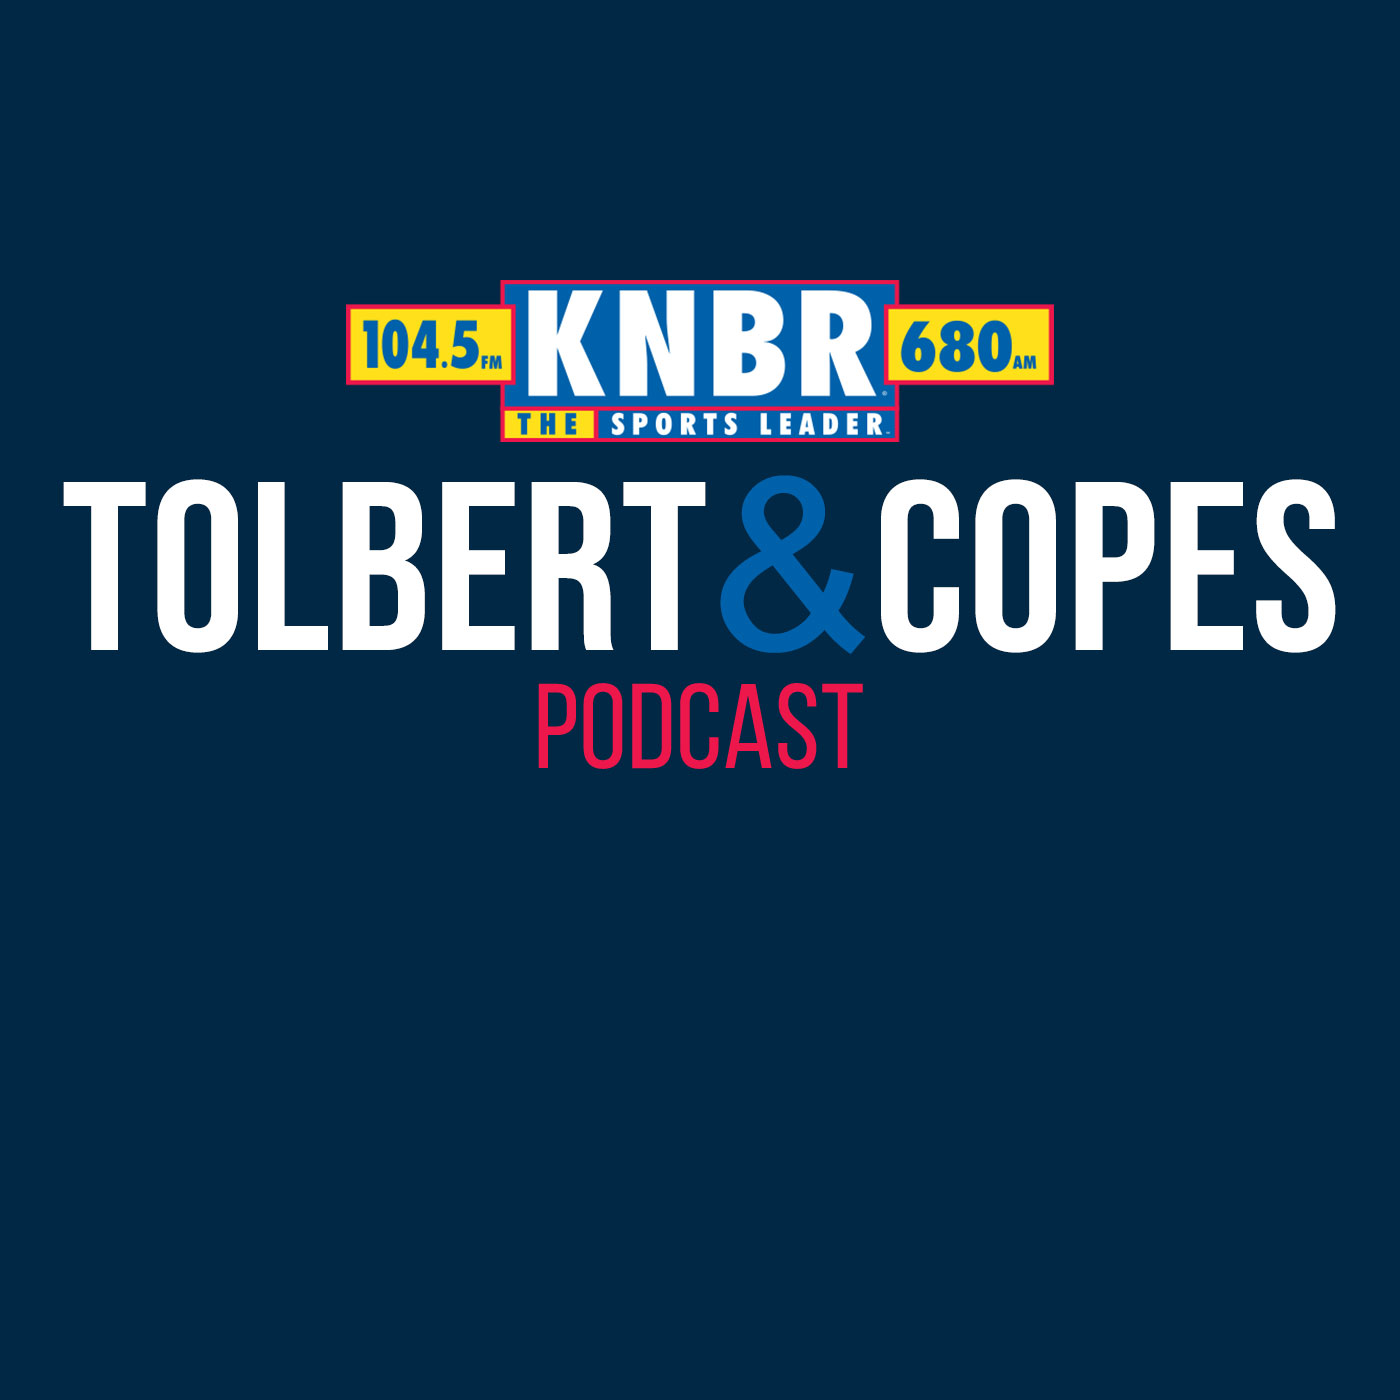 4-29 Matt Maiocco joins Tolbert & Copes to discuss the 49ers draft & which players could be having their last season